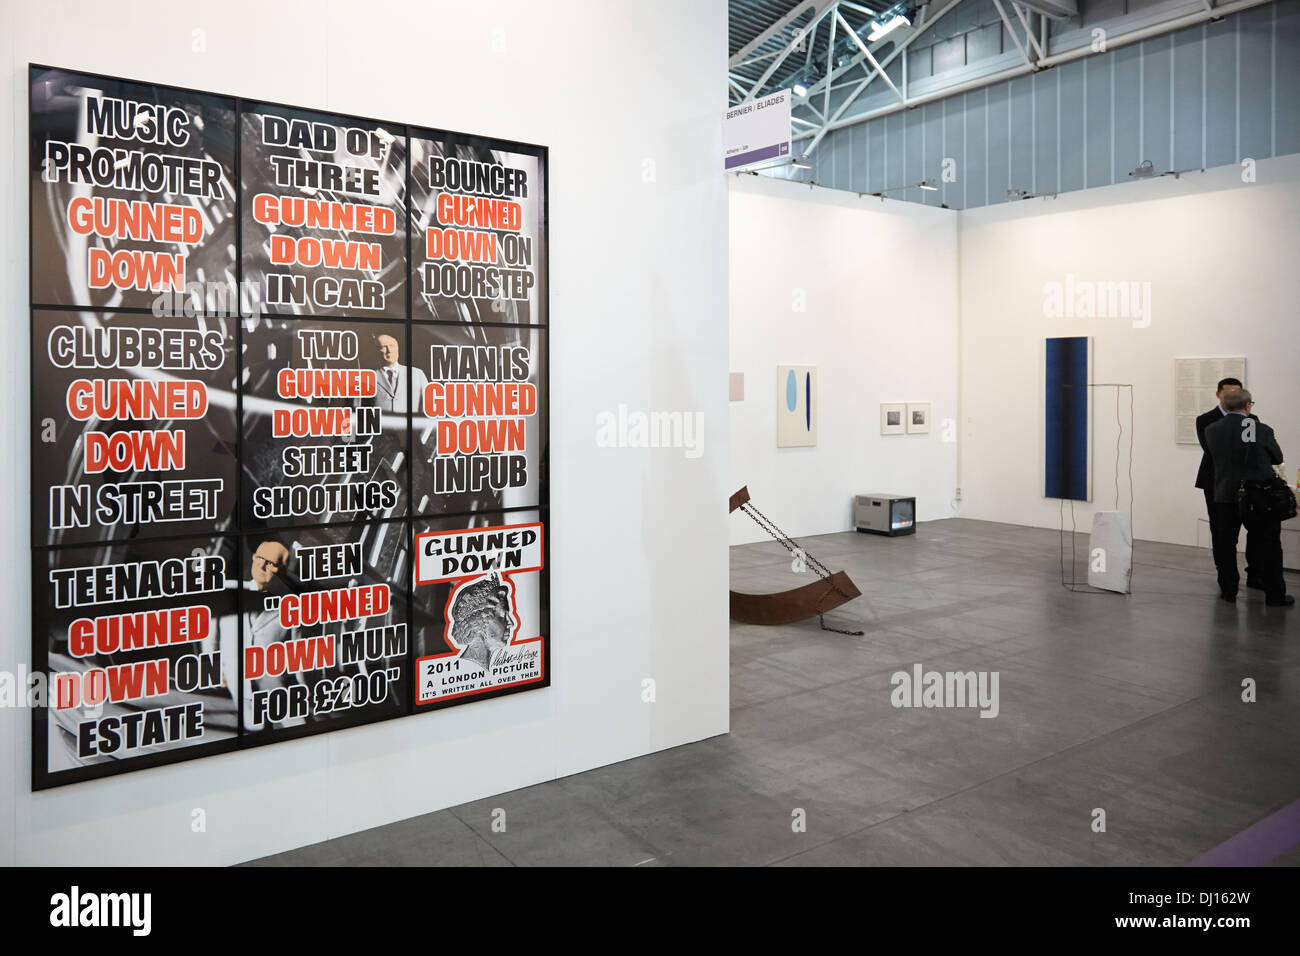 Gilbert & George artwork and visitors during Artissima 2013 art fair in Turin, Italy Stock Photo